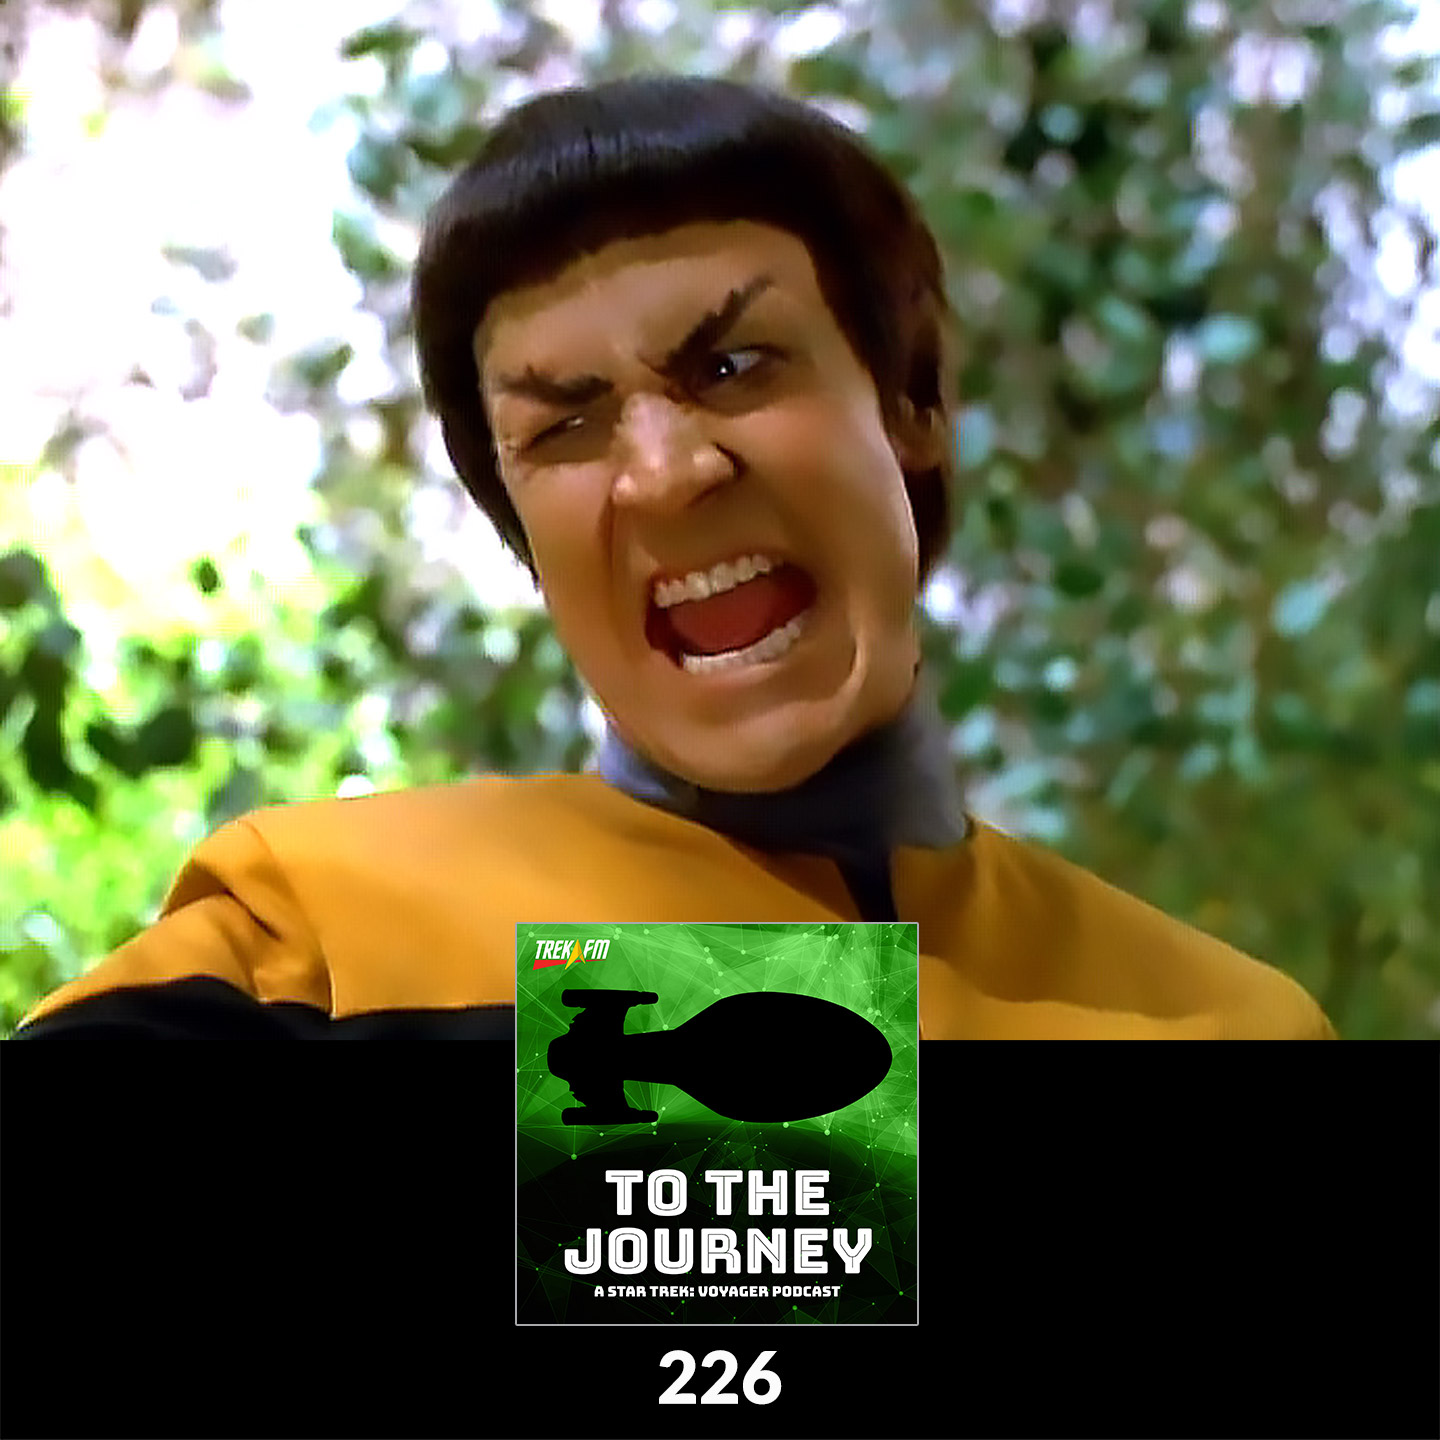 To The Journey 226: No Seven-Year Mission - Vorik Character Analysis.